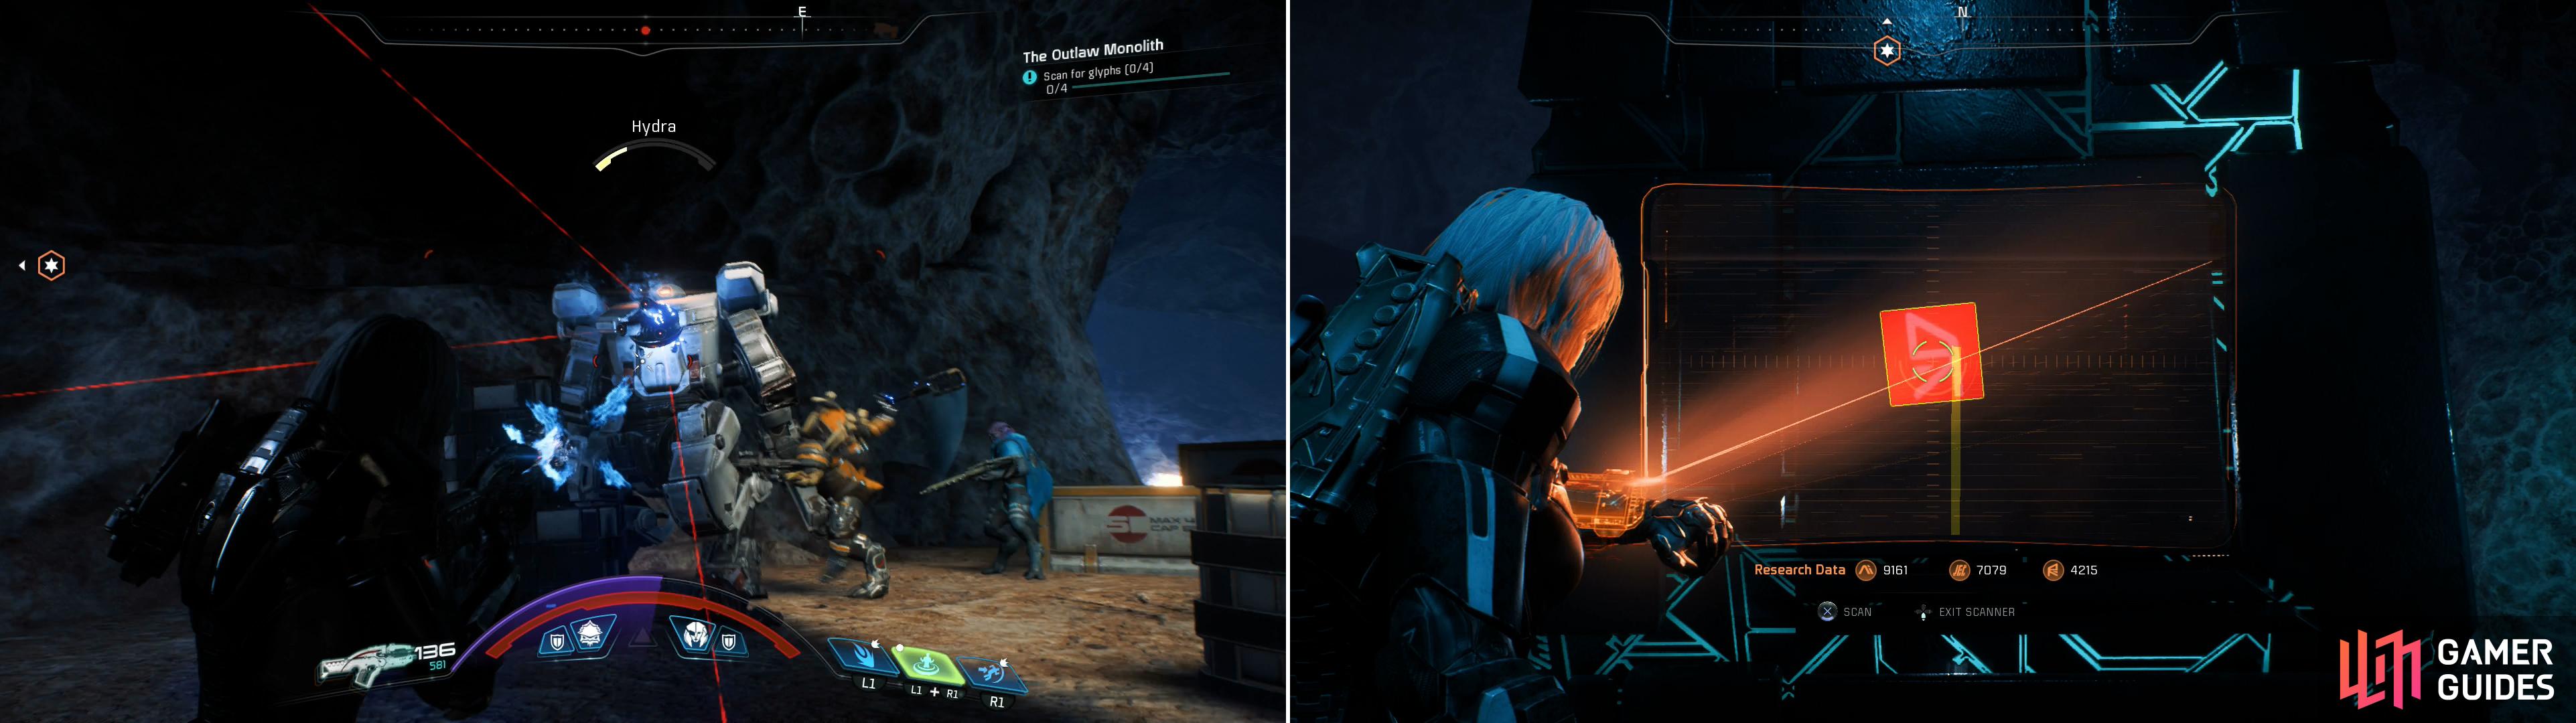 Defeat the Raiders in the cave, including their Hydra mech (left) then scan the glyphs to activate the southern monolith (right).